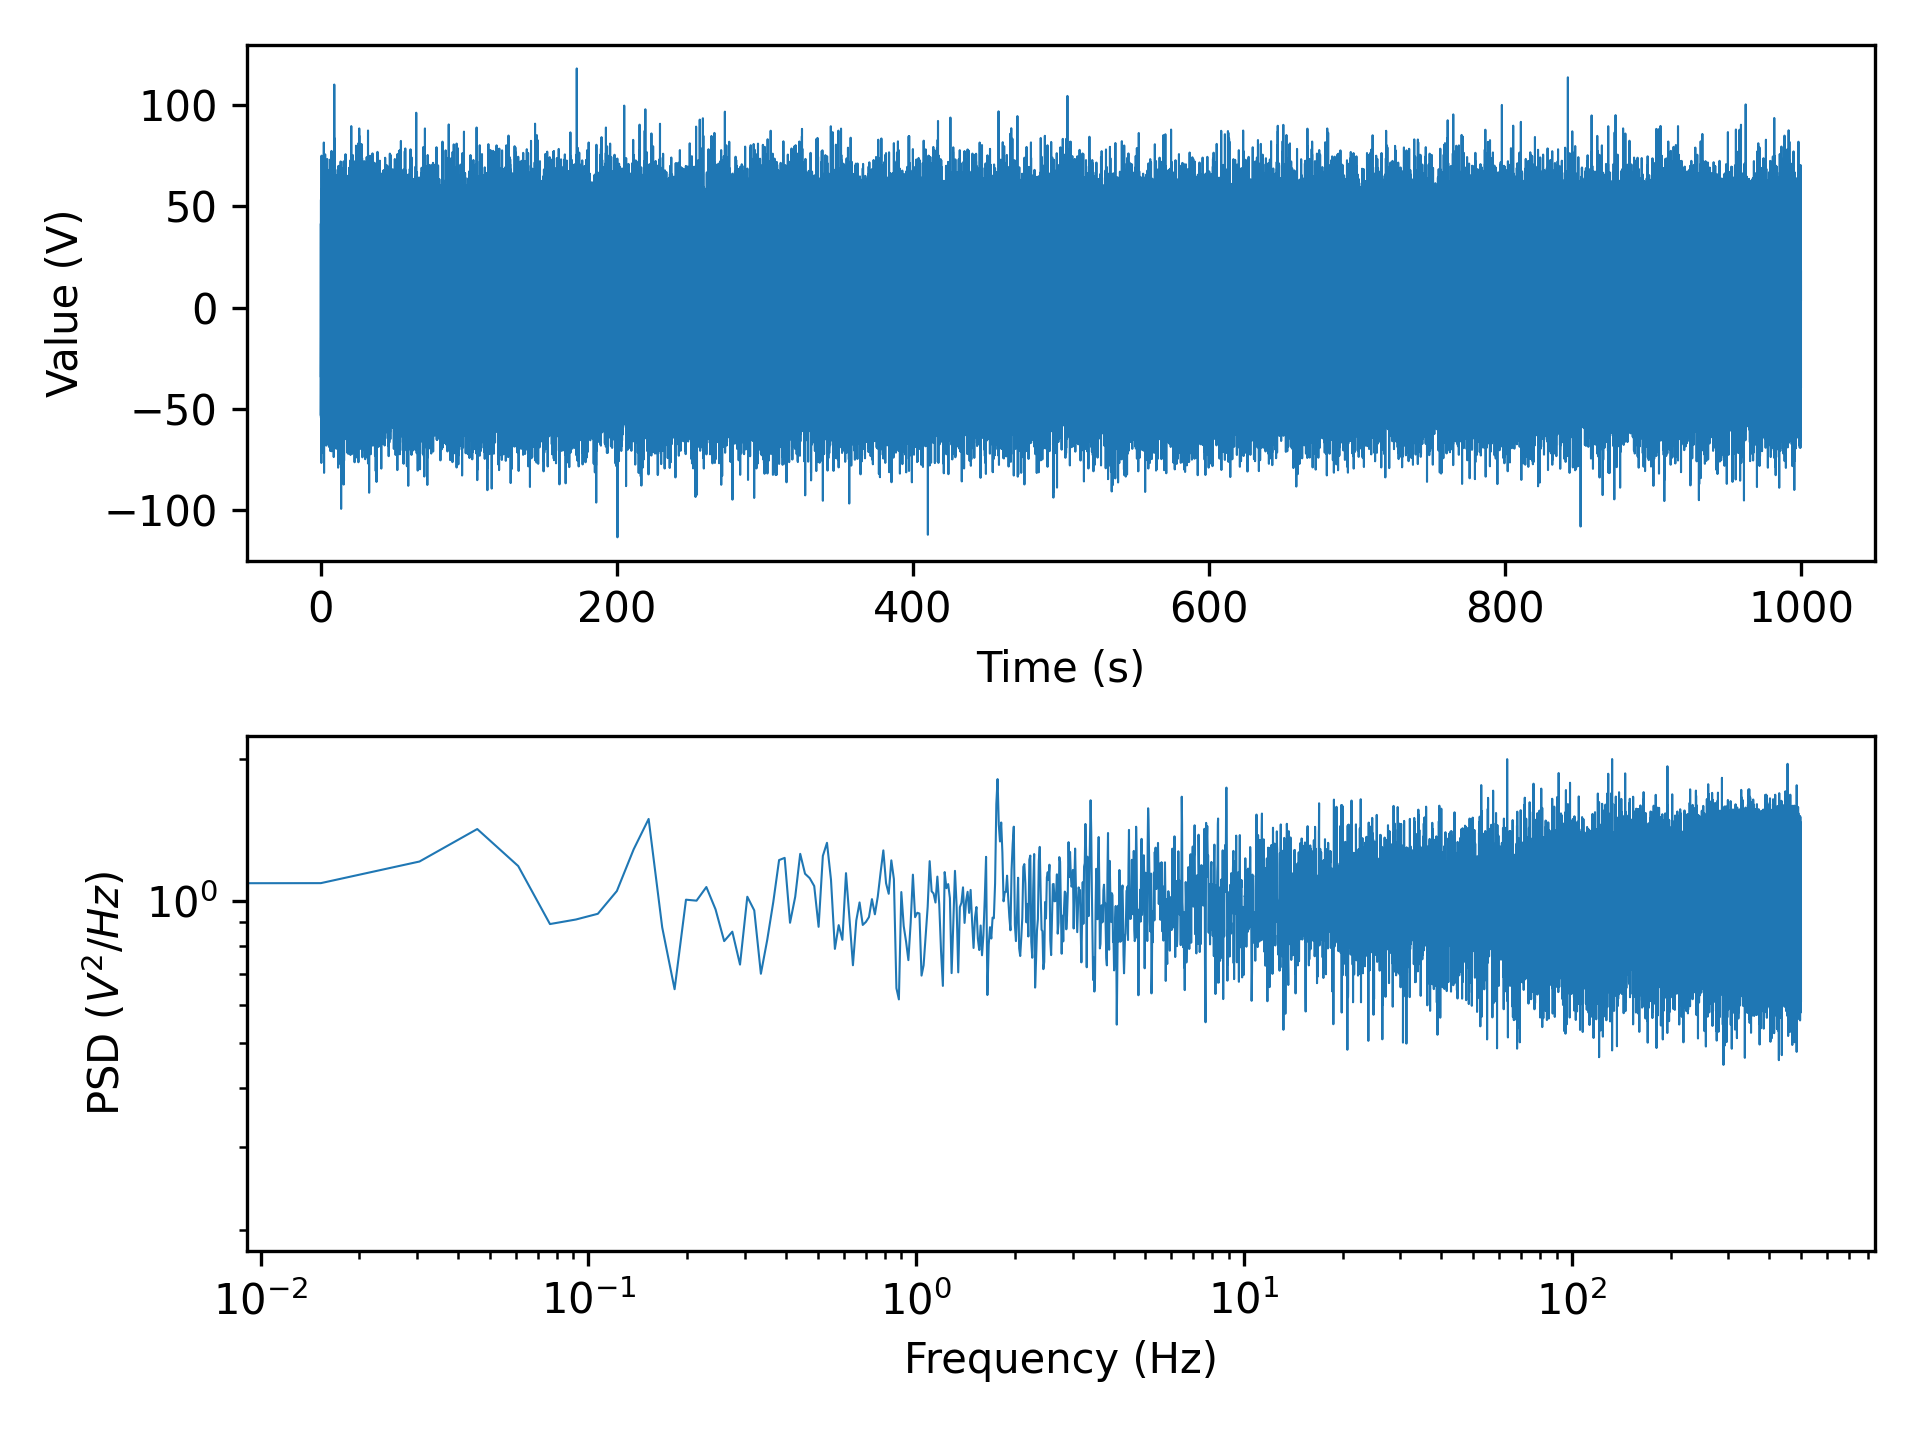 A figure with two subplots containing a single blue trace each. The top shows a noisy time based signal that is around 1000 seconds long, and has peaks up to a value of 100 V or so. The bottom is a logarithmic plot showing a noisy power spectral density estimate that is relatively close to 1.0 between the frequencies of 0.001 to 500 Hz.